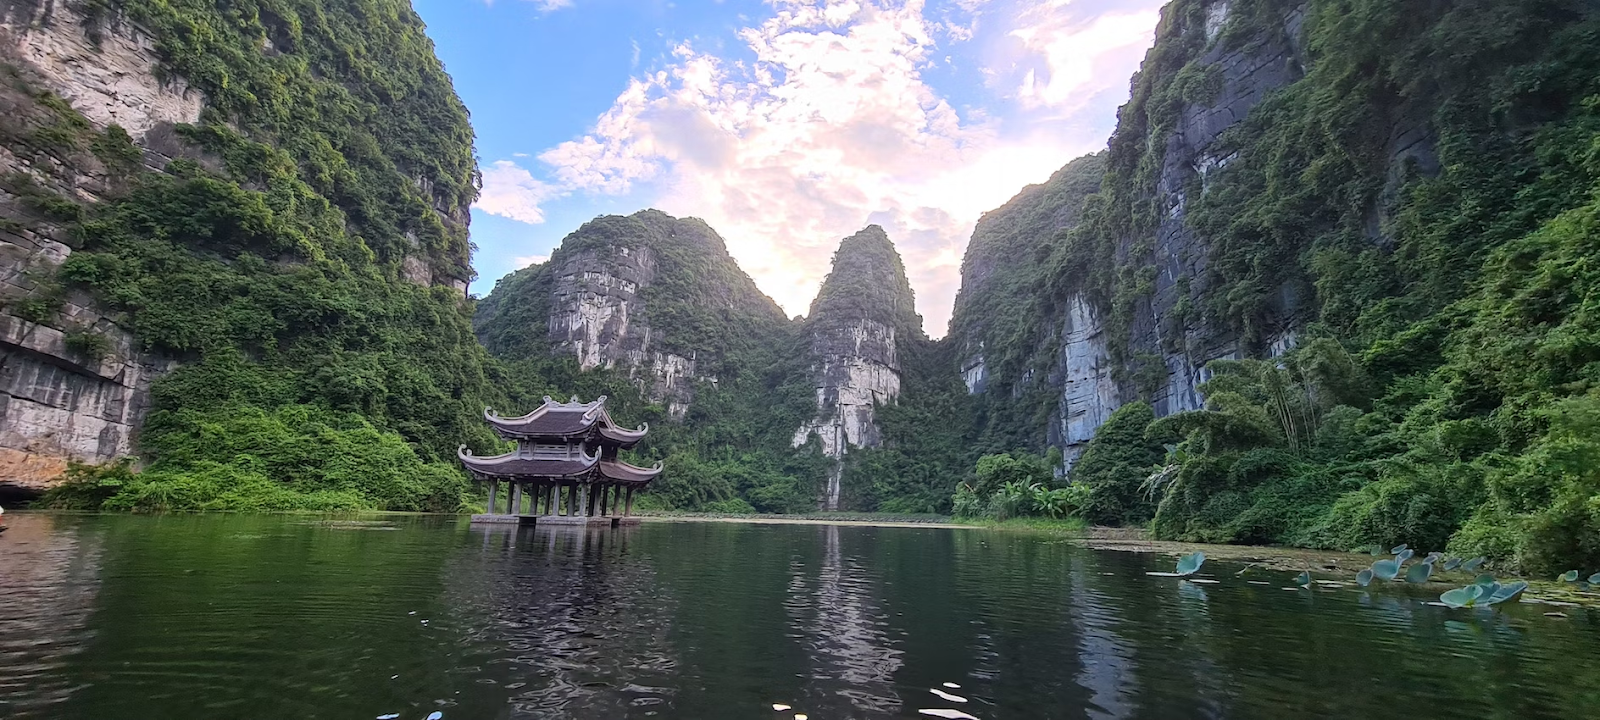 Travel Destinations in Vietnam: Ninh Binh Province– Magnificent Karst Mountains and Rice Fields